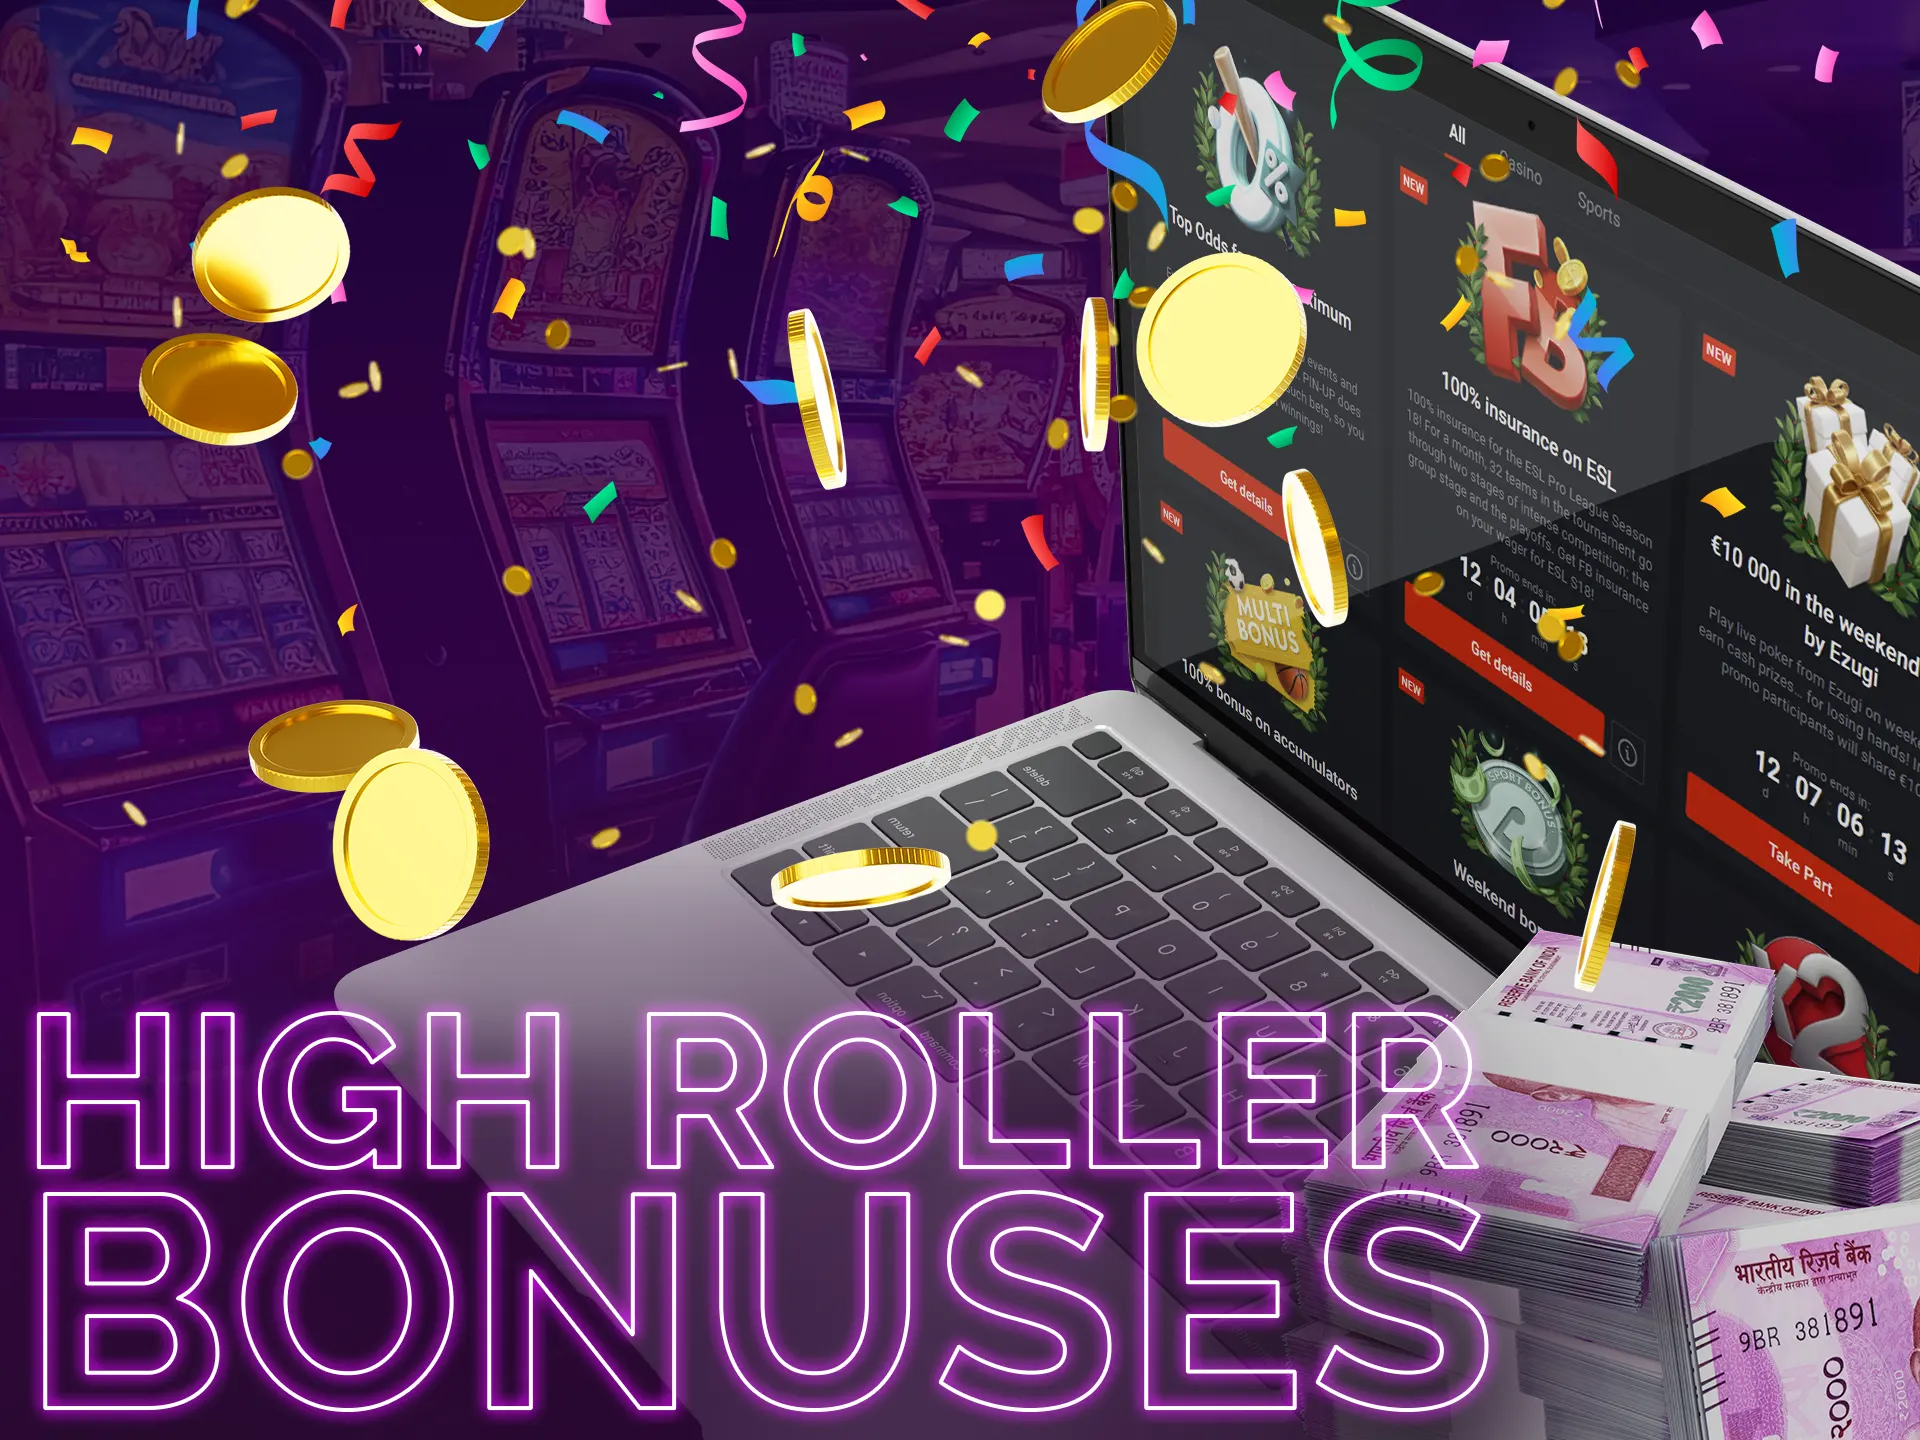 Tailored for high rollers, these bonuses offer substantial rewards, higher limits, and dedicated support for big bets.